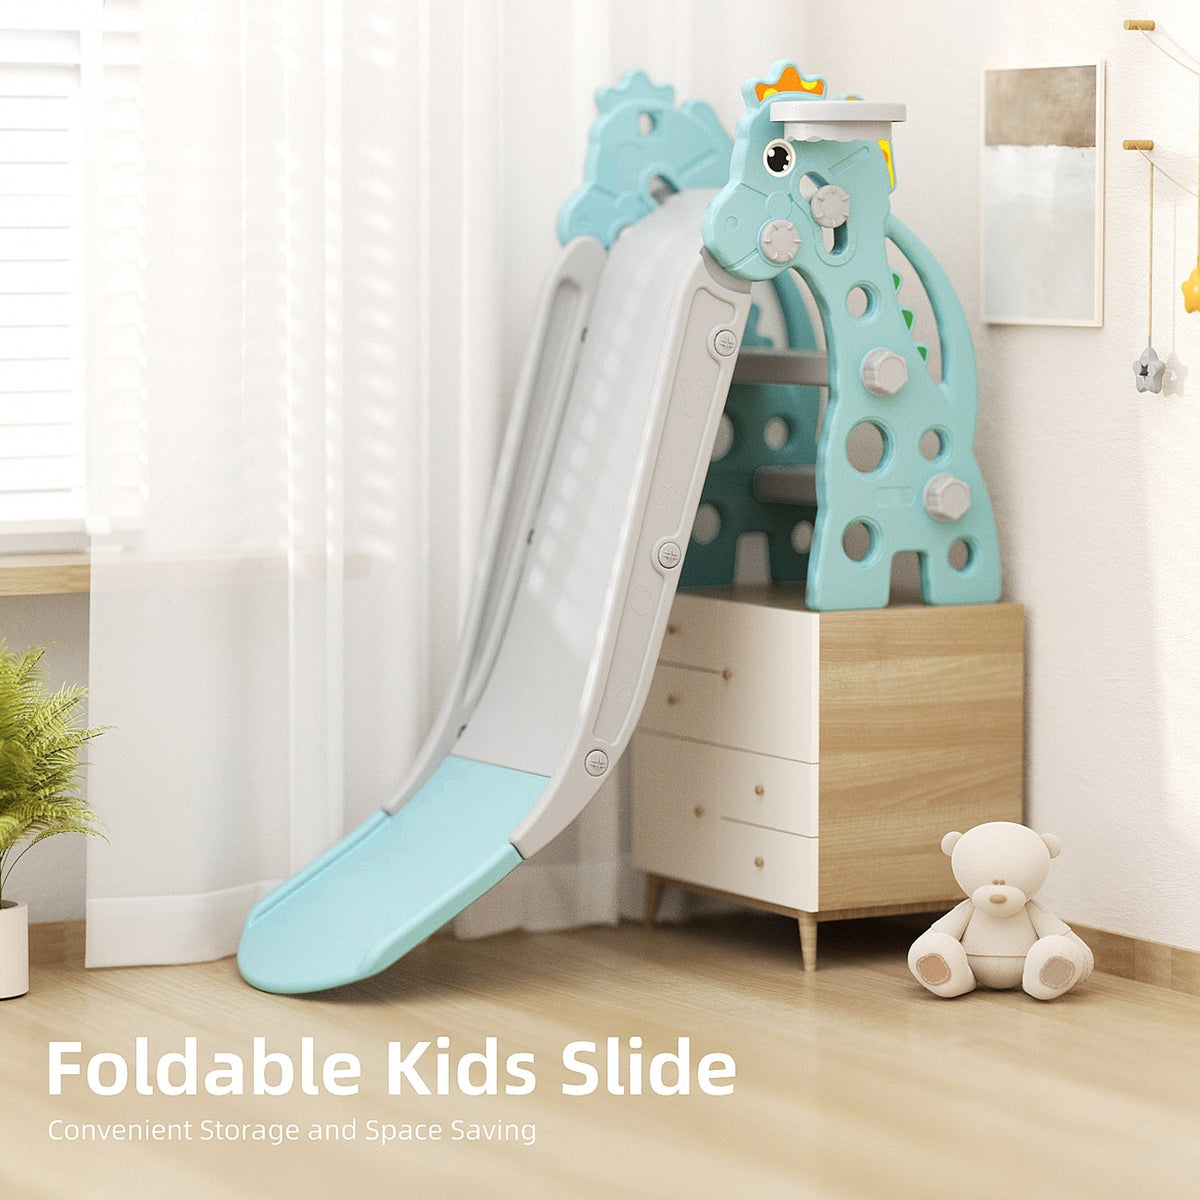 67i 3 in 1 Foldable Slide Set for Toddlers Age 1-3 Green (Copy)